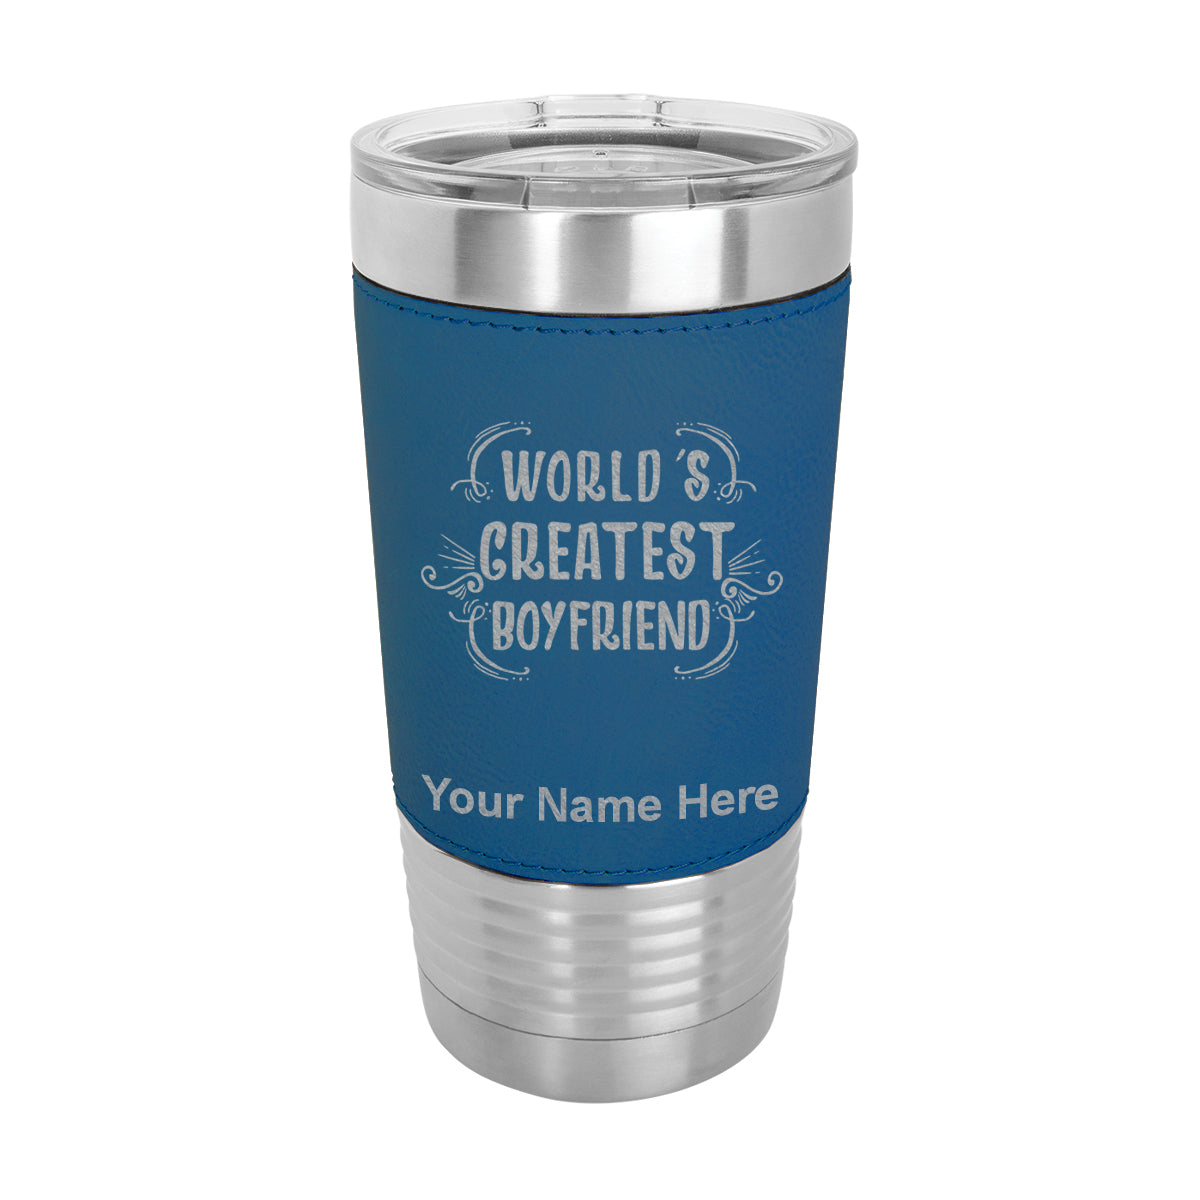 20oz Faux Leather Tumbler Mug, World's Greatest Boyfriend, Personalized Engraving Included